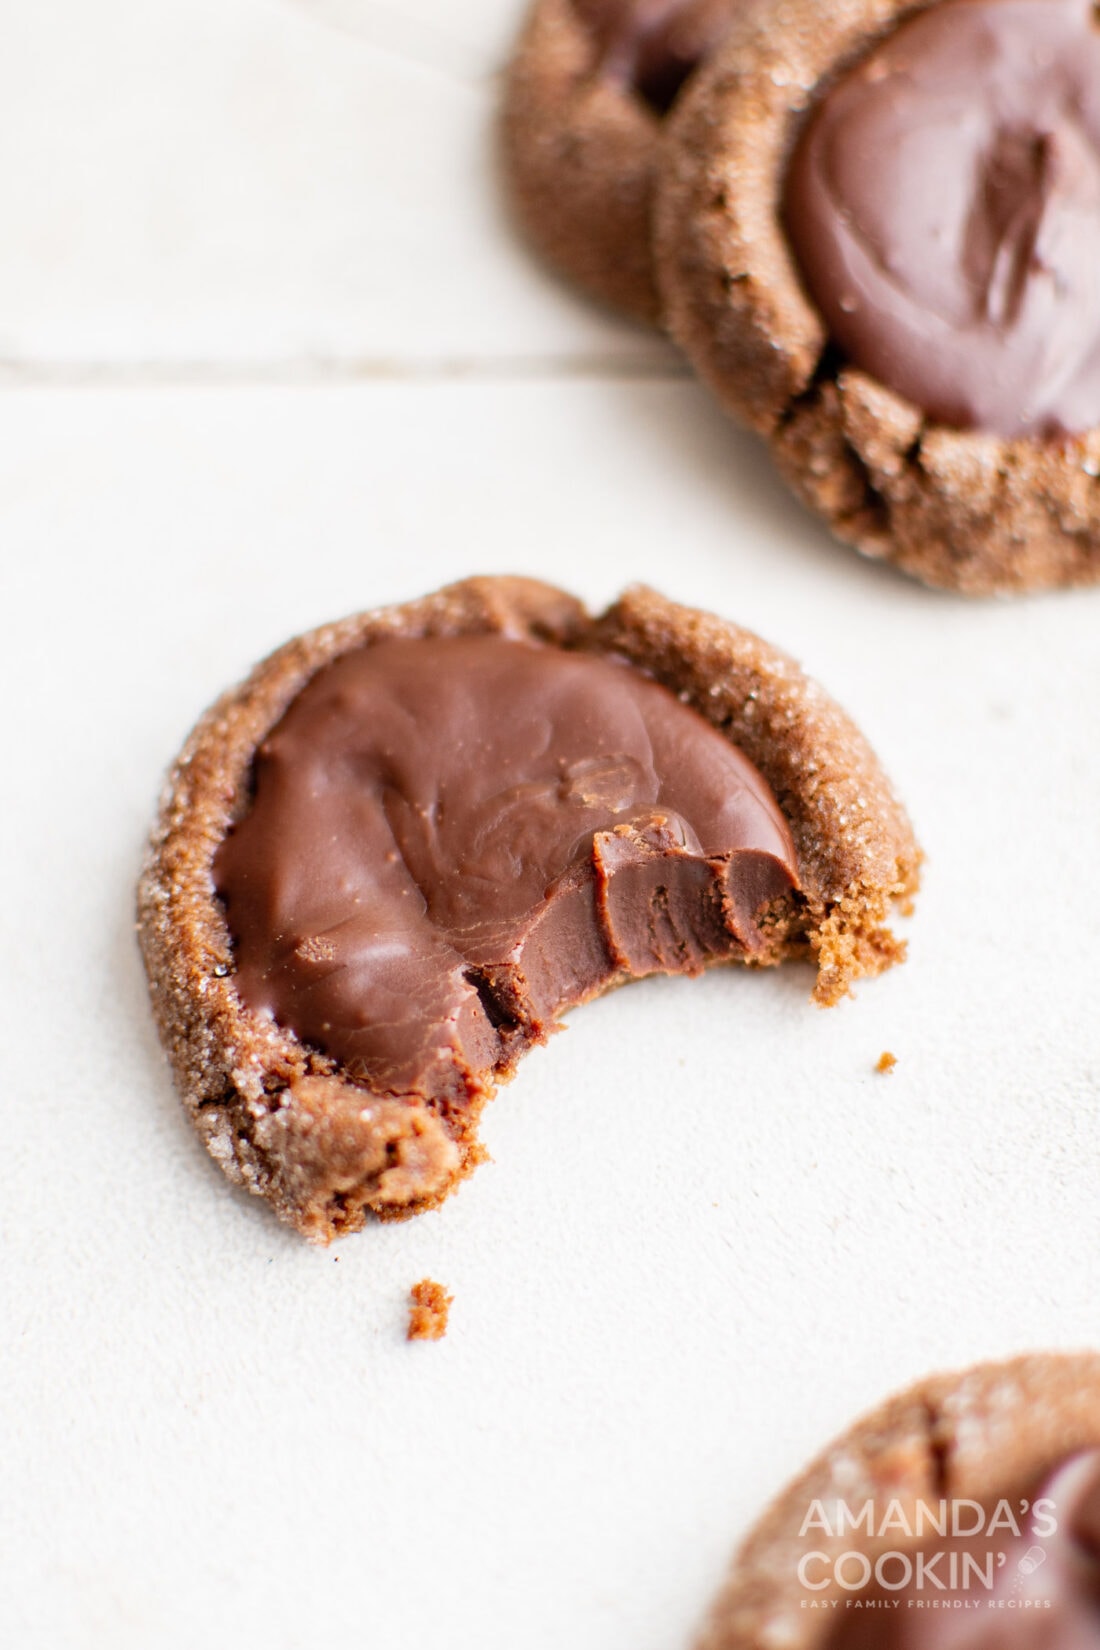 Chocolate Thumbprint Cookie with a bite out of it